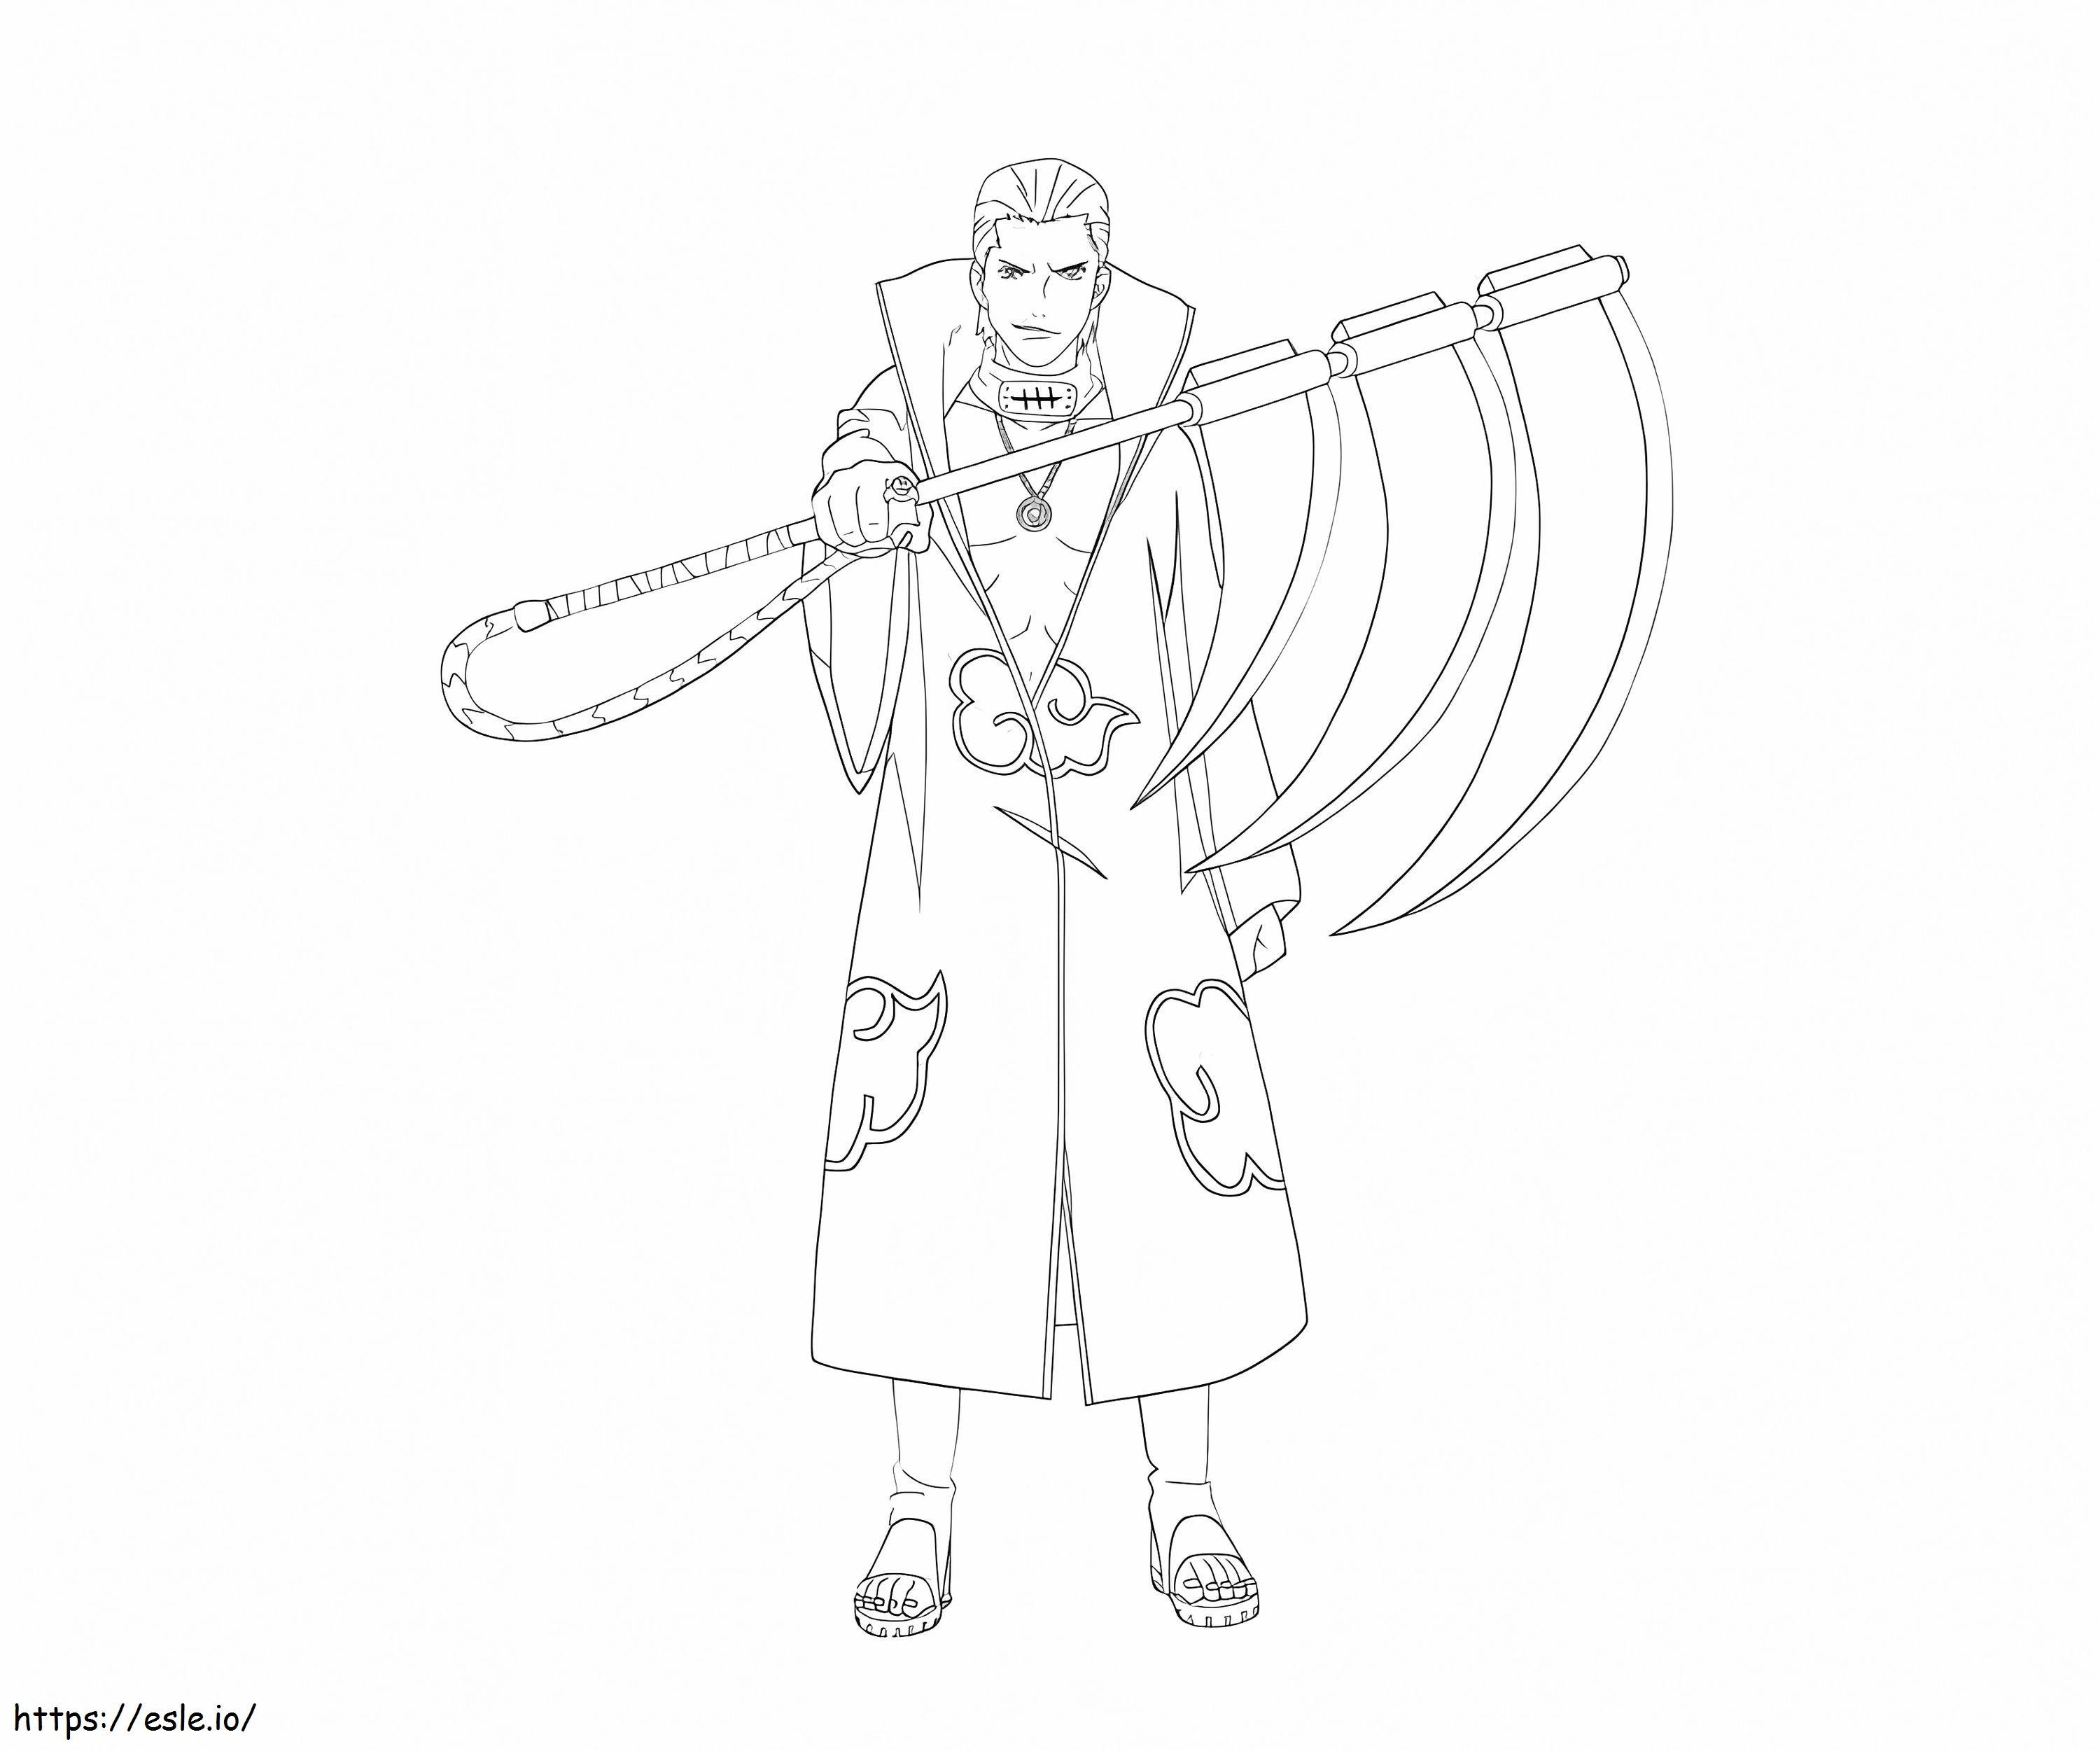 Hidan Holding Weapon coloring page